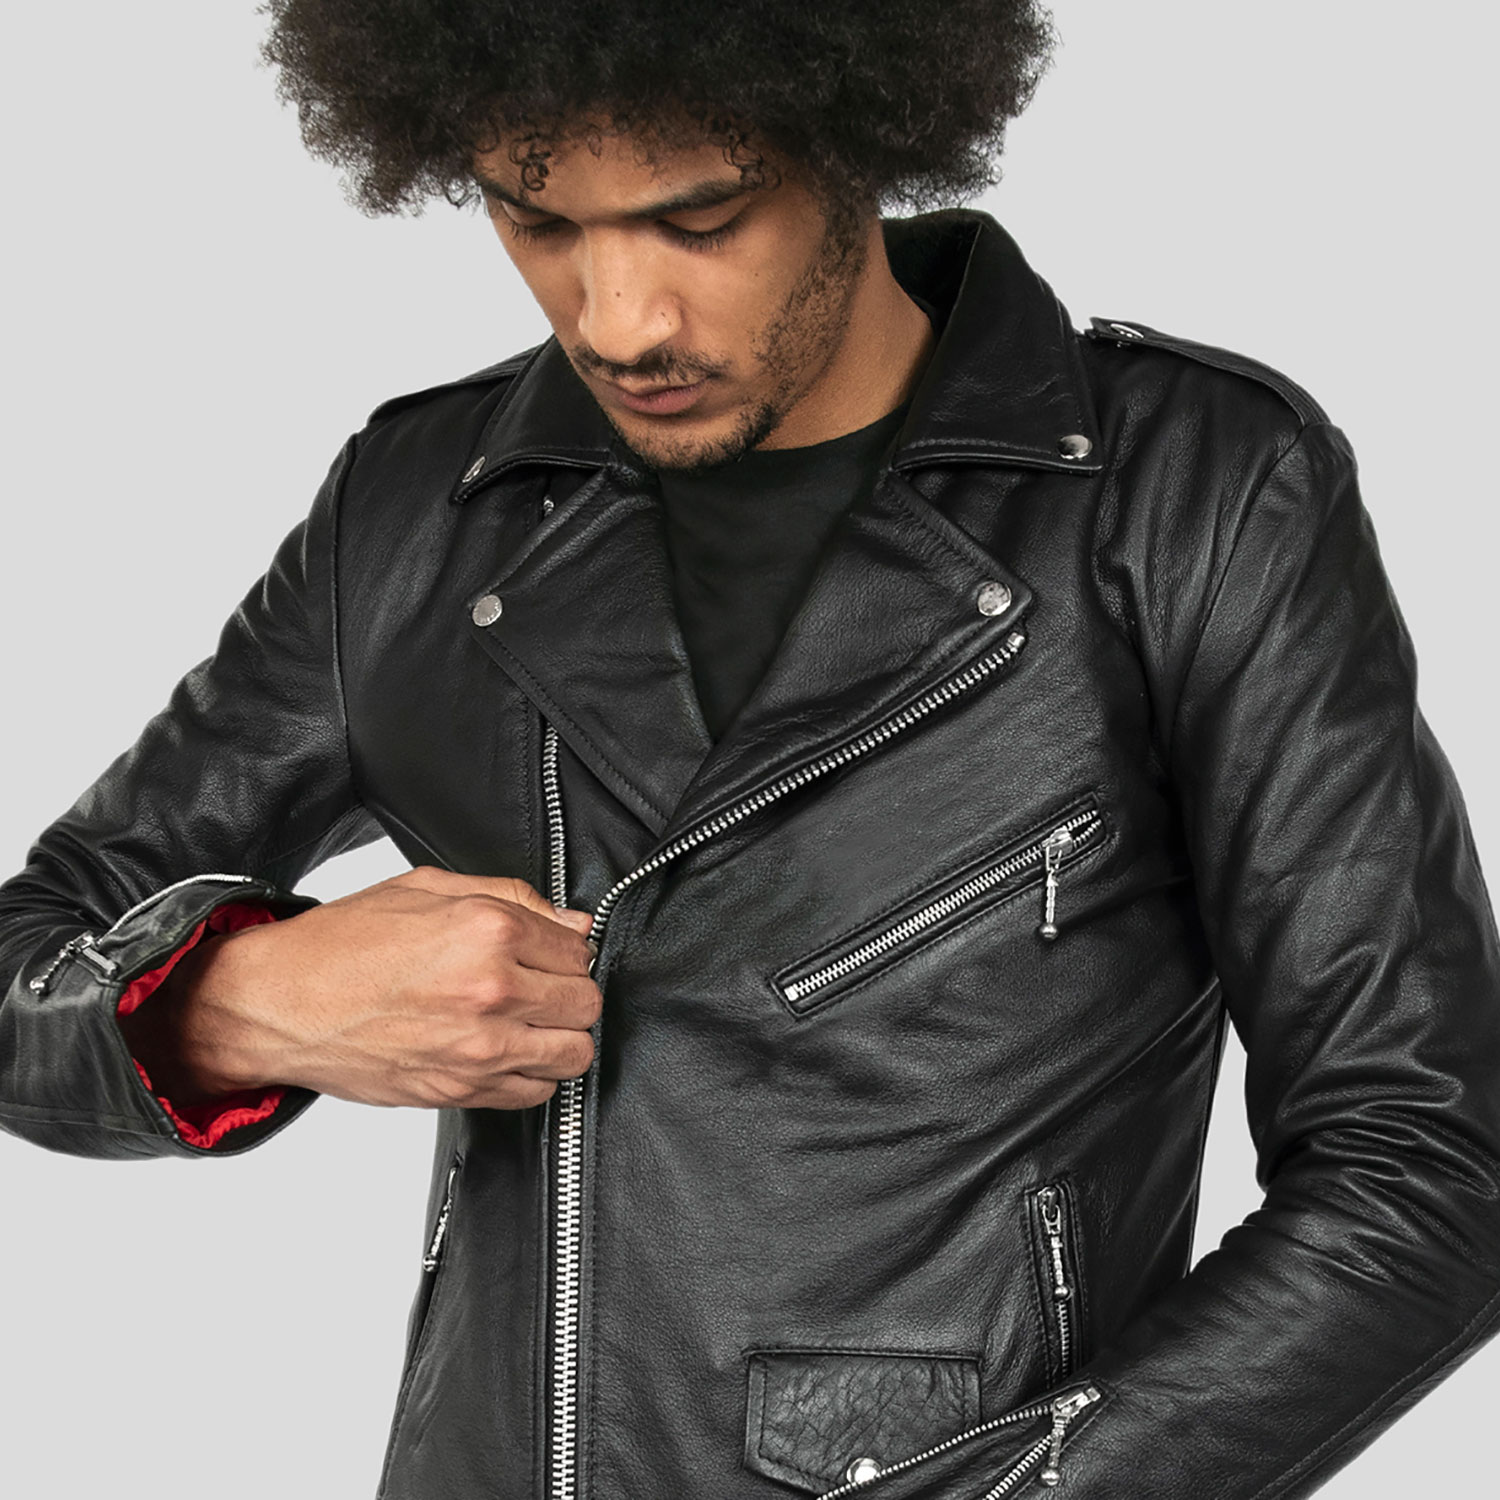 Straight and Long | Hell Leather - Nickel Jacket Black Apparel - For Tall Men Commando To